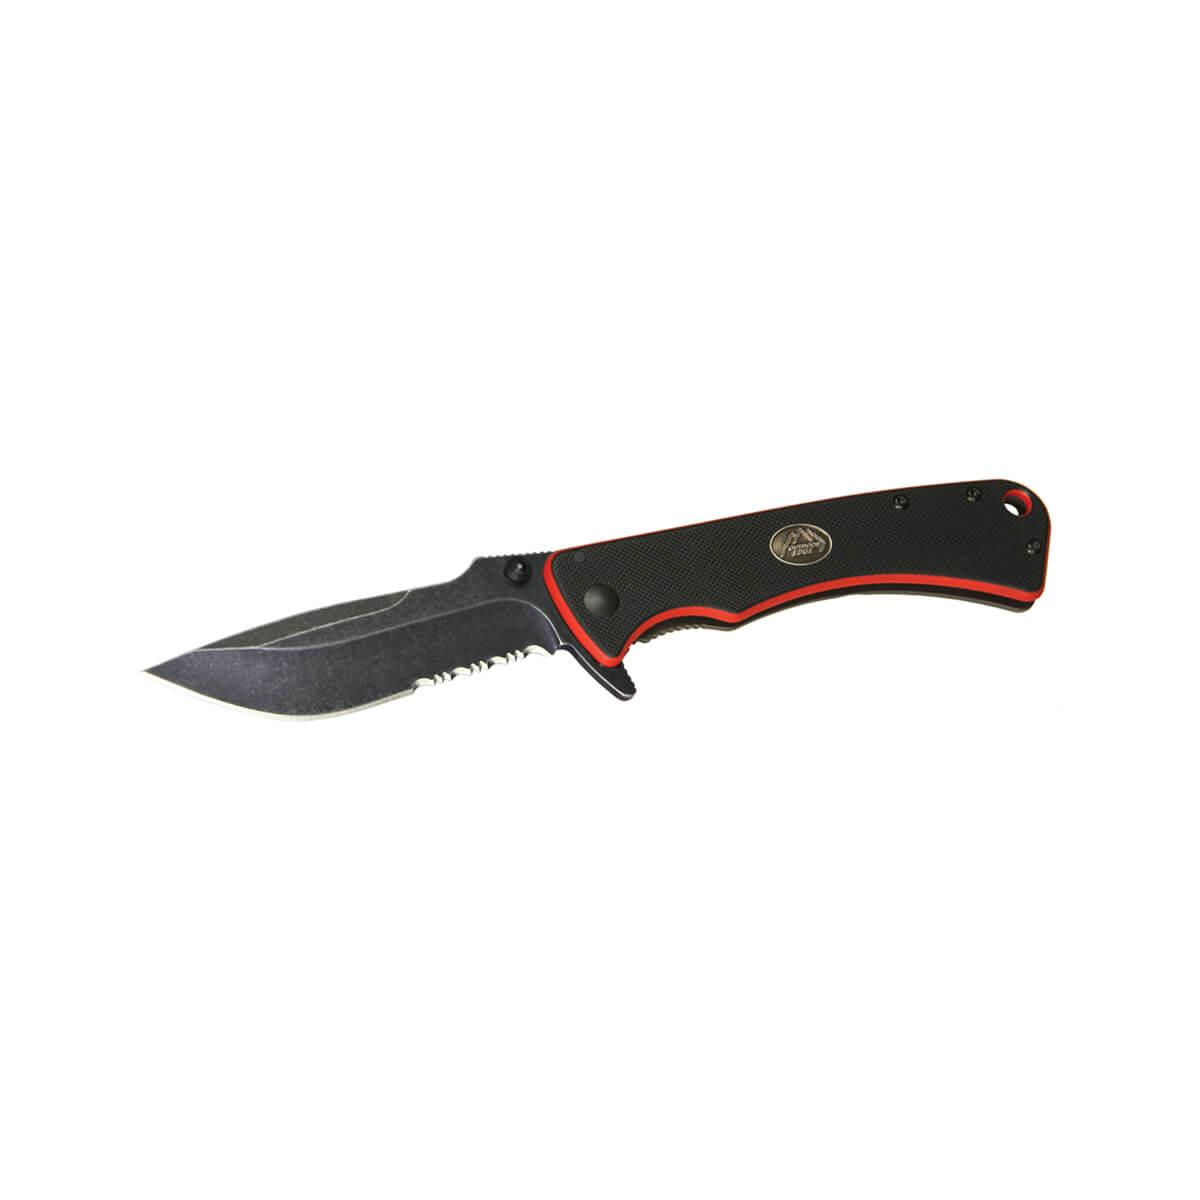  Divide 3 Inches With 50 % Serrated Edge Knife